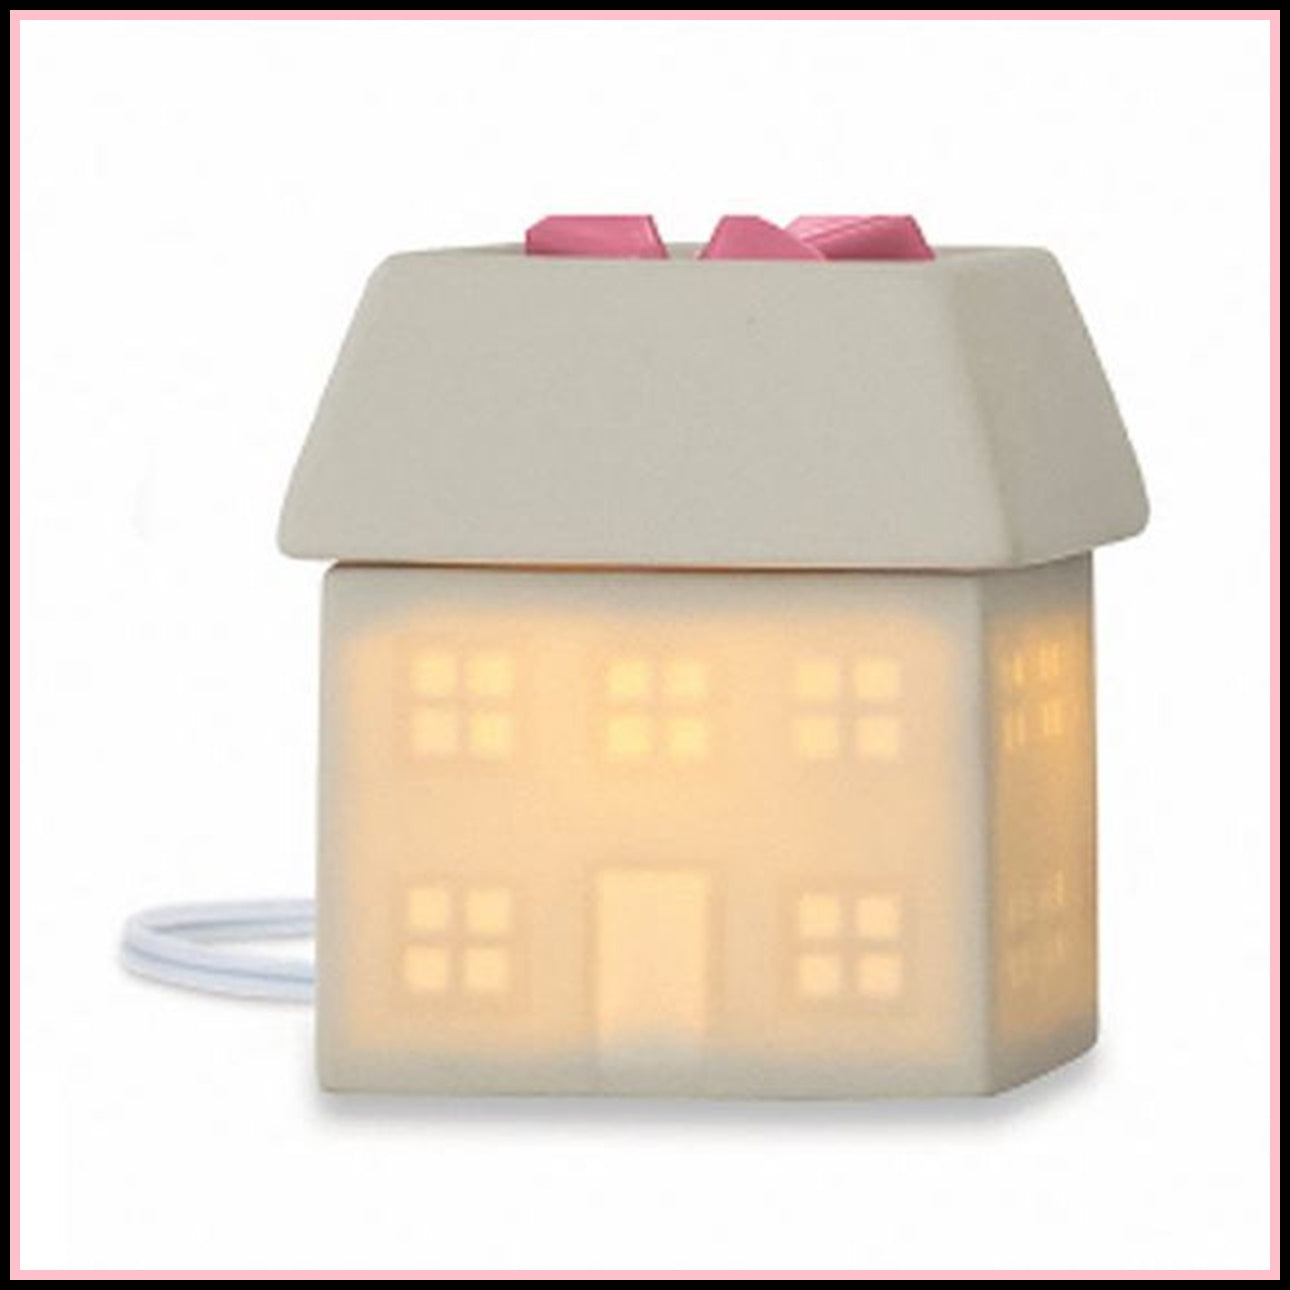 PartyLite Electric ScentGlow Glo Scent Plus Wax Aroma Melts Warmer WELCOME HOME HOUSE - Plastic Glass and Wax